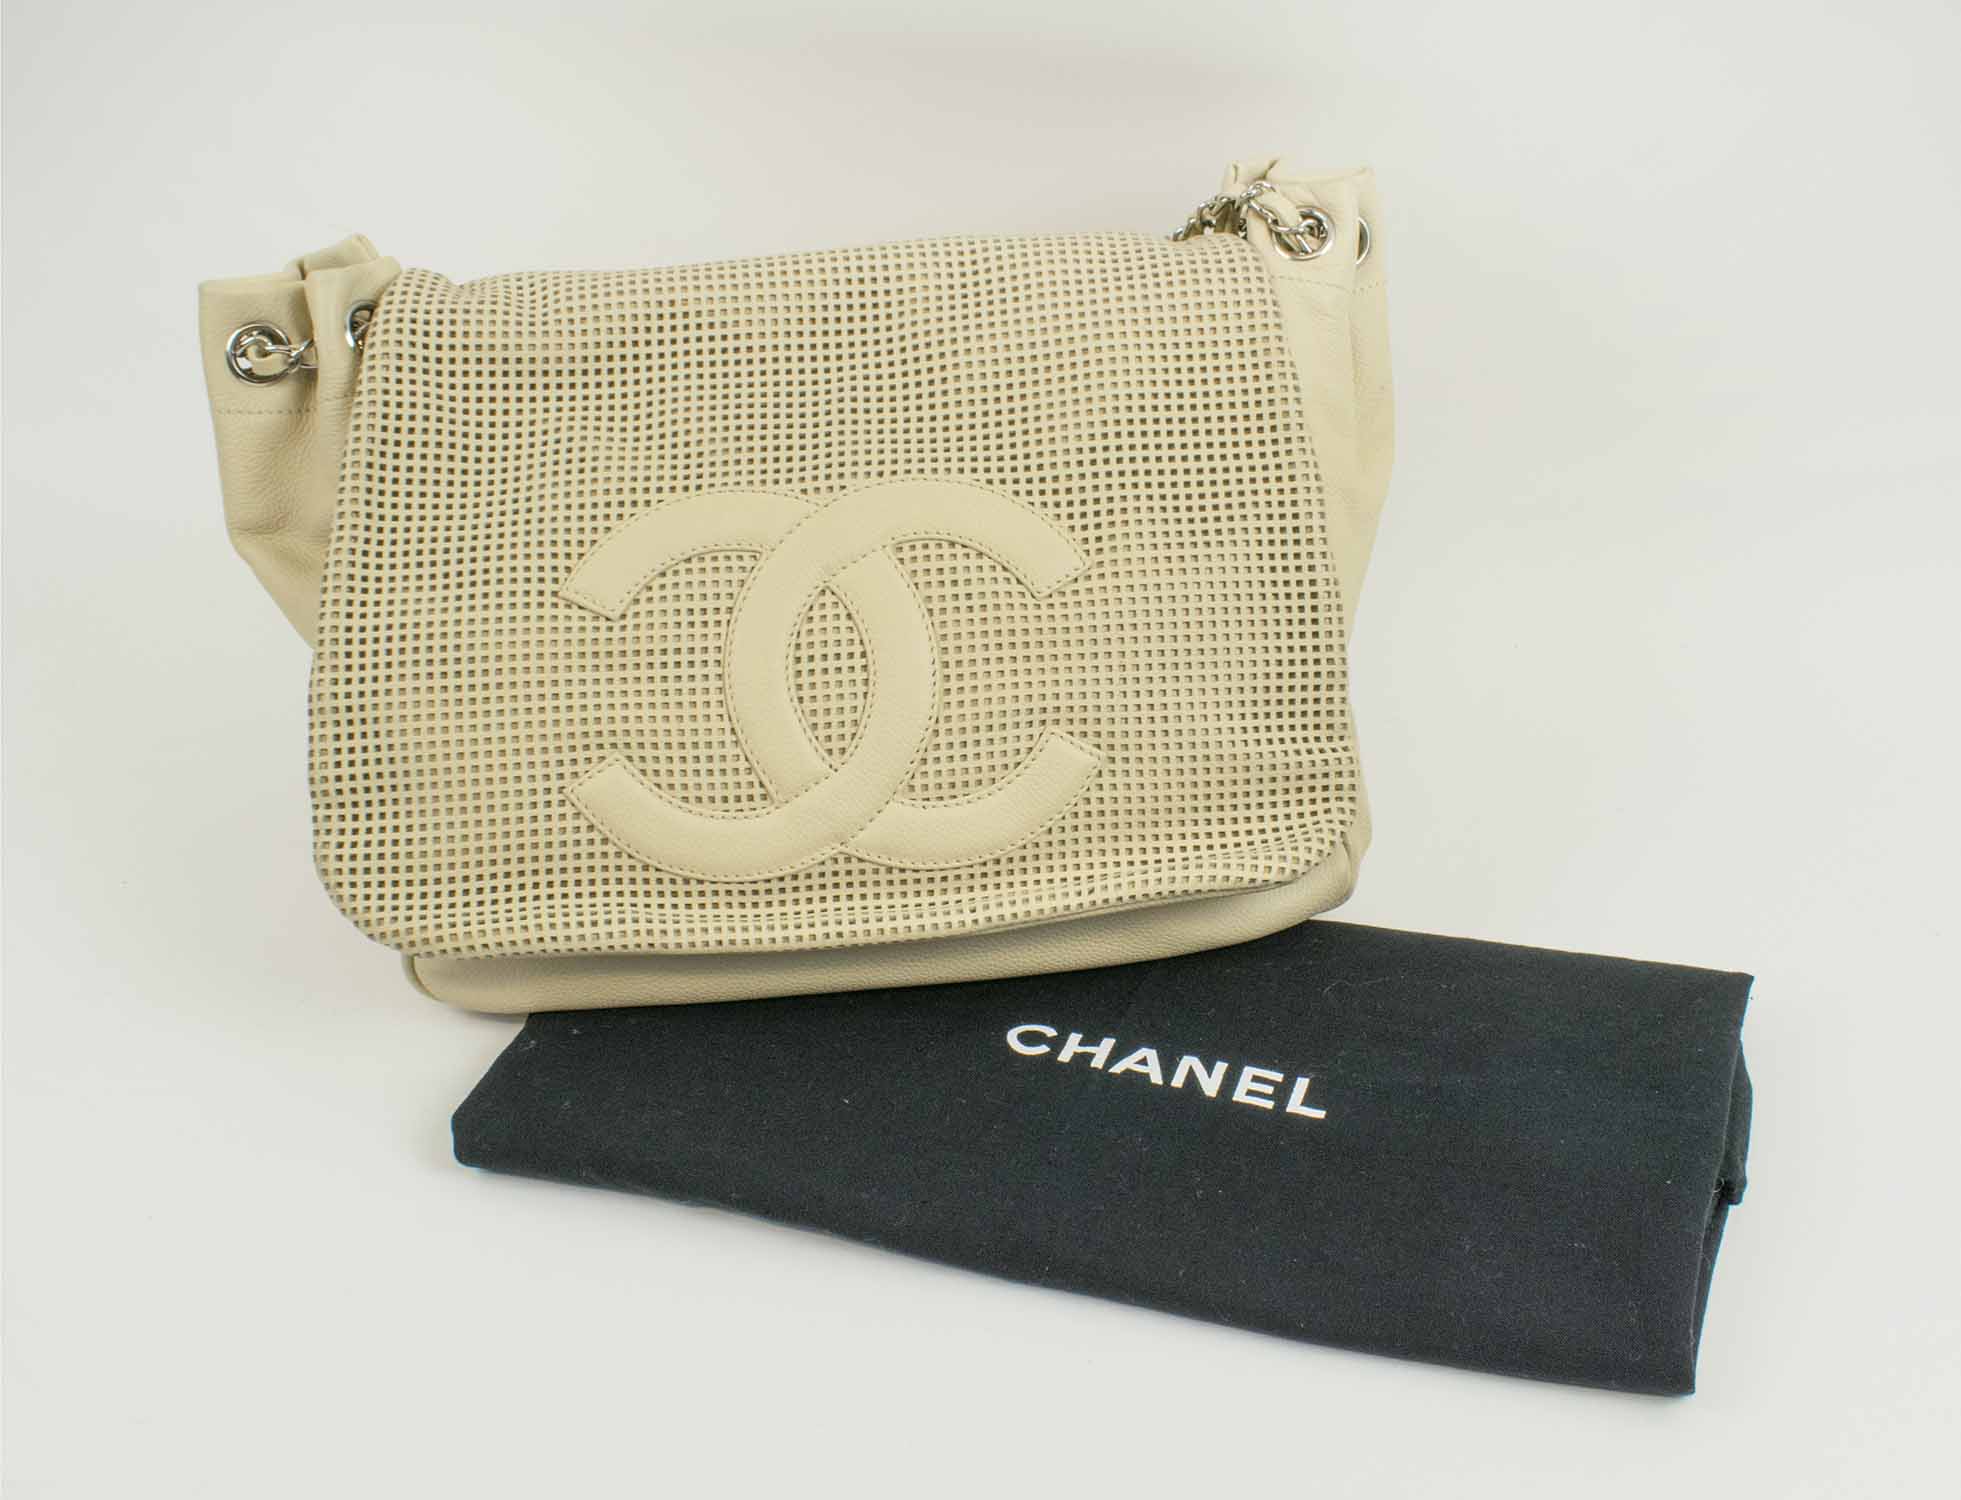 CHANEL TOTE HANDBAG, flap closure with iconic CC logo at the front